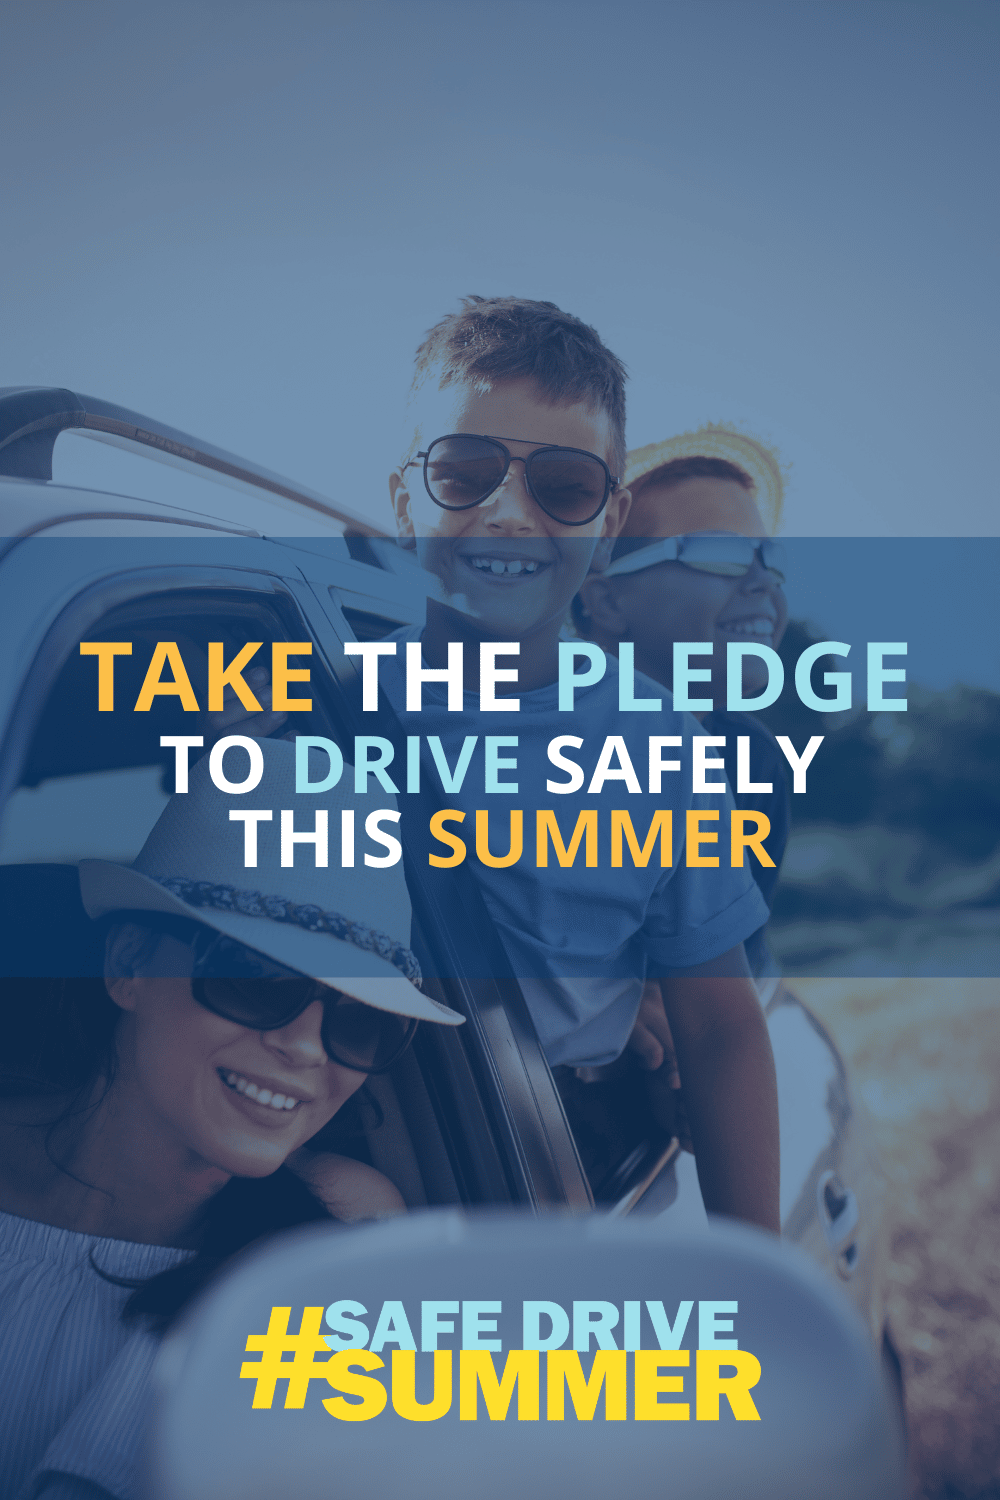 #SafeDriveSummer: Take the Pledge To Drive Safely This Summer